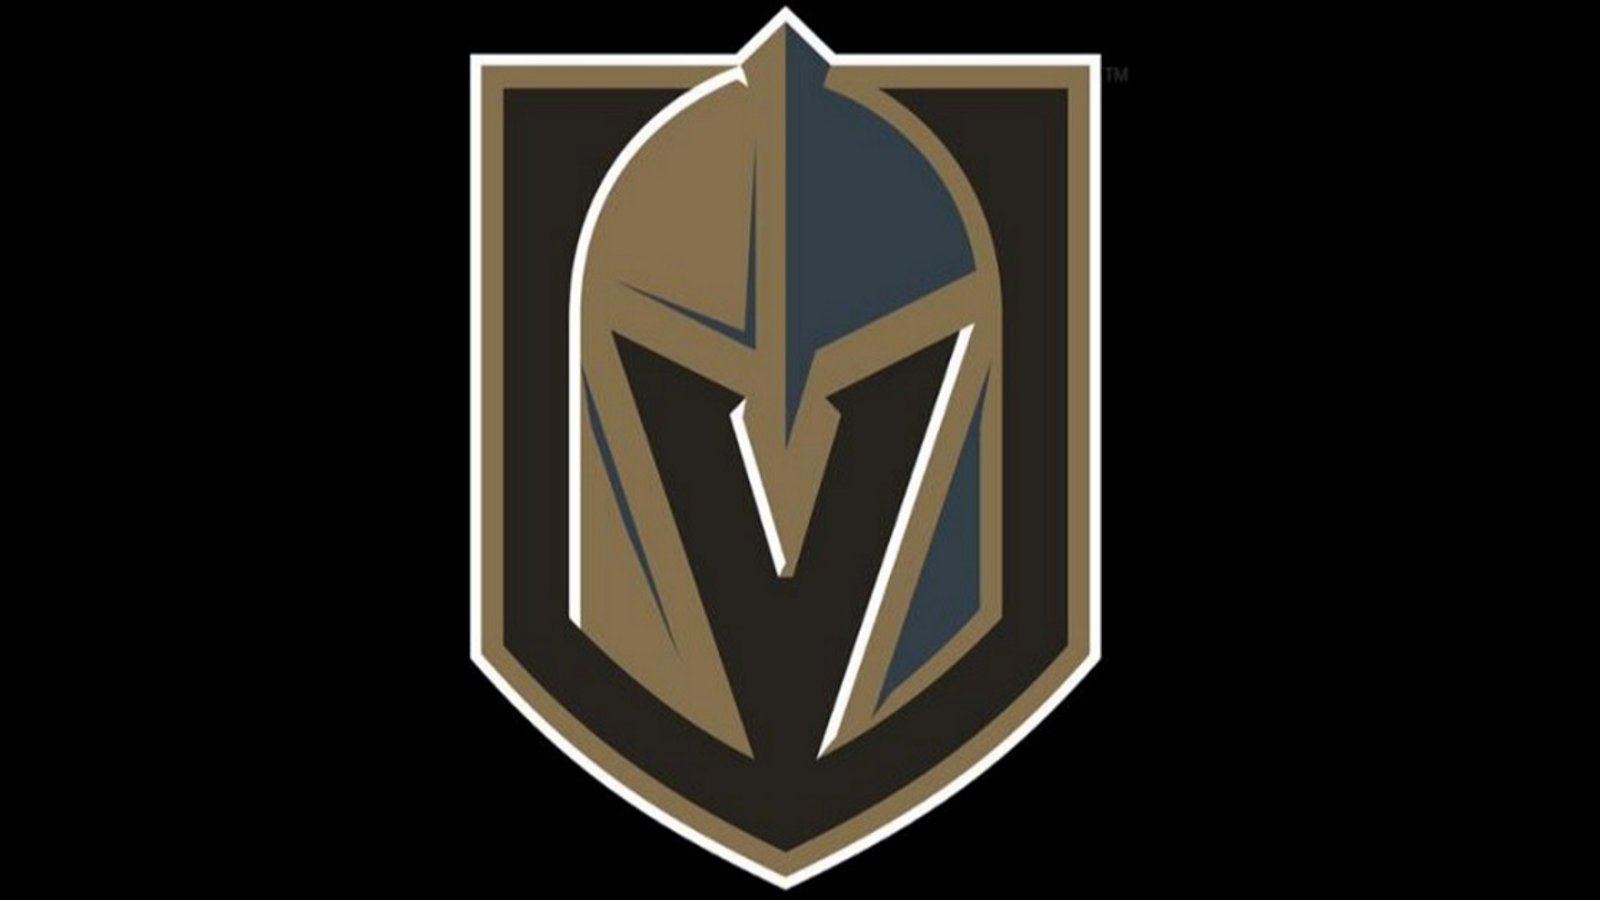 Breaking: The Golden Knights have introduced their first ever mascot!